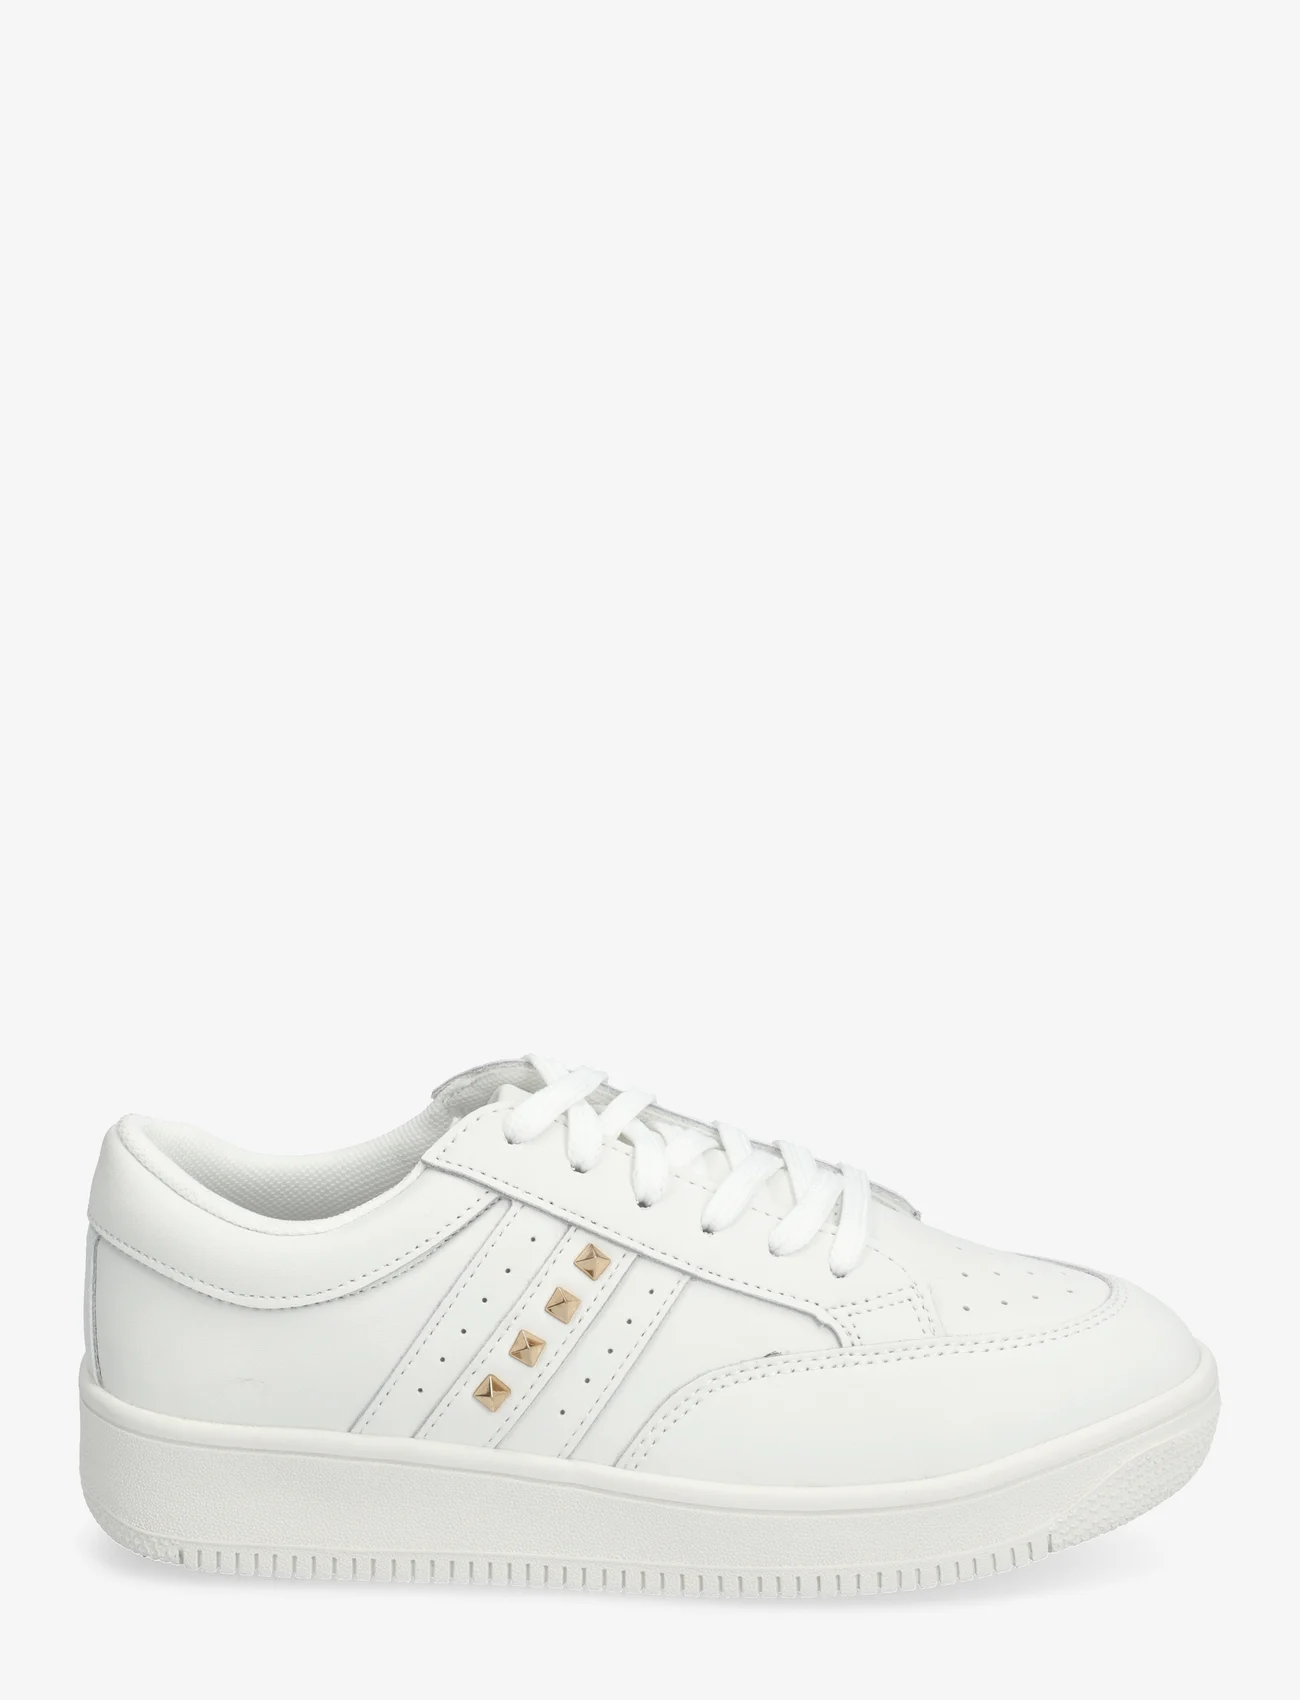 Sofie Schnoor - Sneaker - lave sneakers - white gold - 1